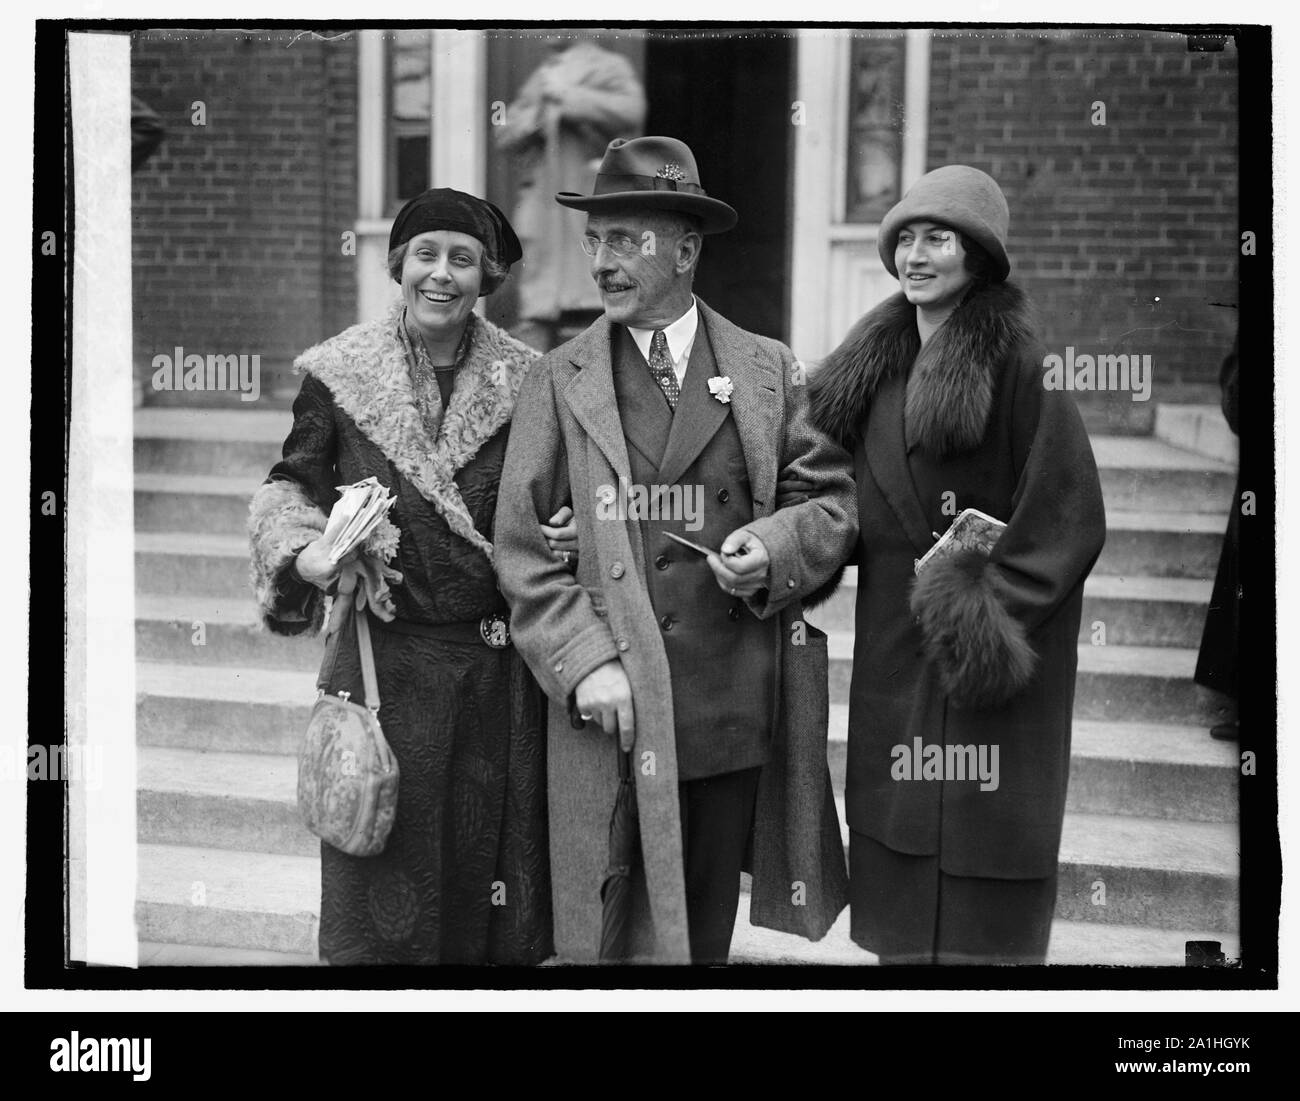 Mrs. Wm. Mitchell, Mr. Sidney Miller and Mrs. Arthur Young, 10/30/25 Stock Photo